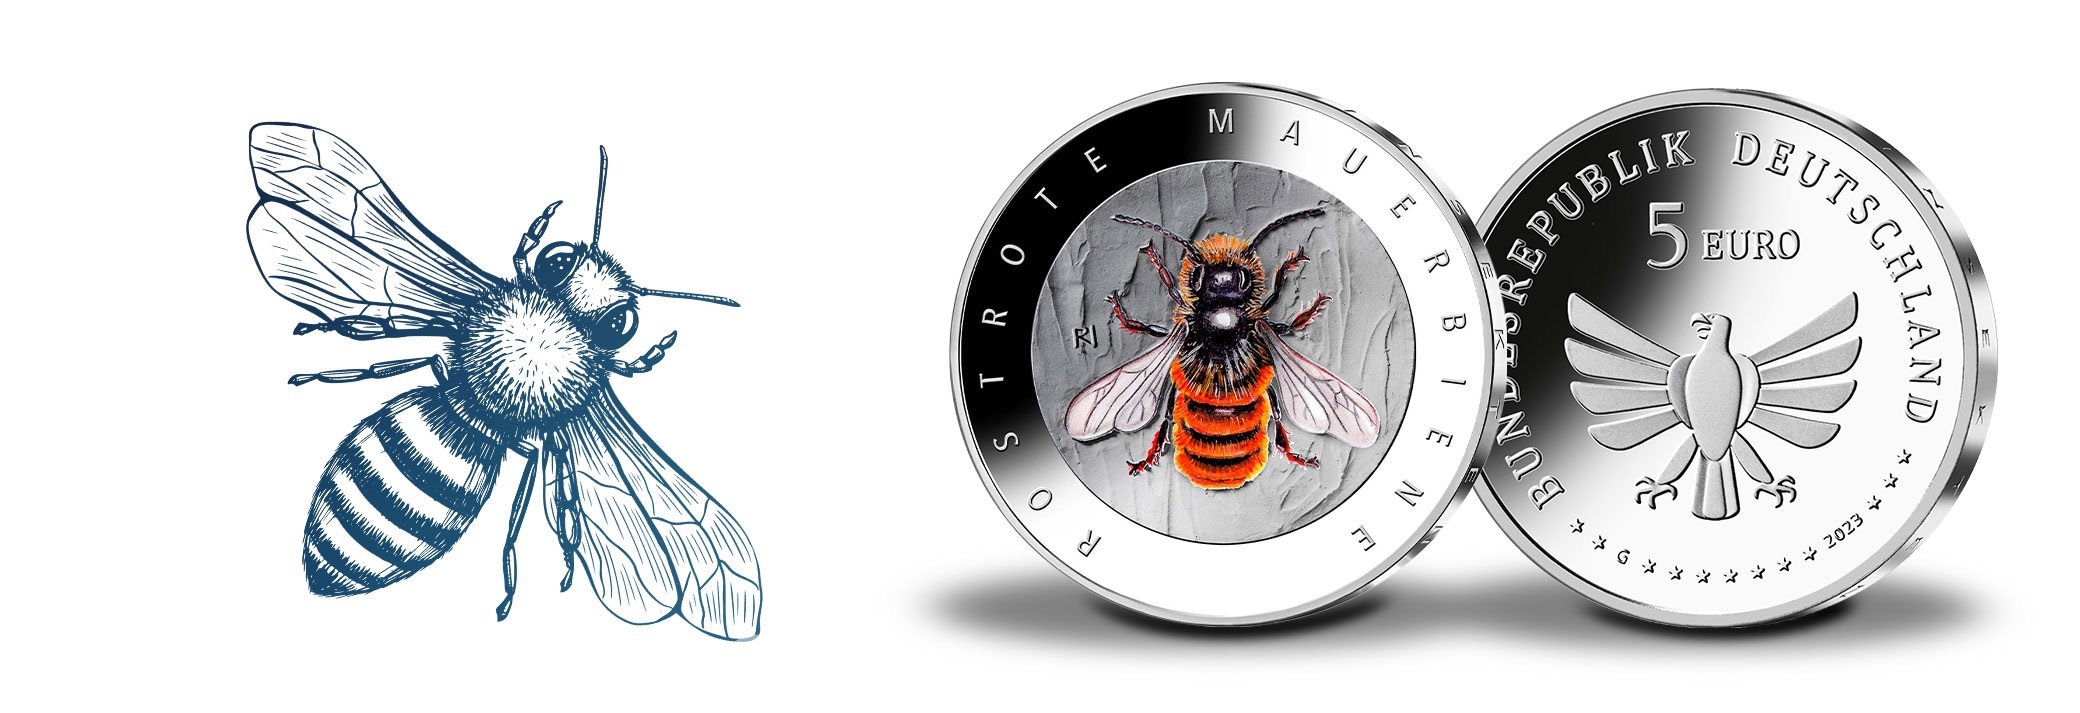 (EUR03.Proof.2023.90N123Q3S5) 5 € Germany 2023 D Proof - Red mason bee (blog illustration) (zoom)